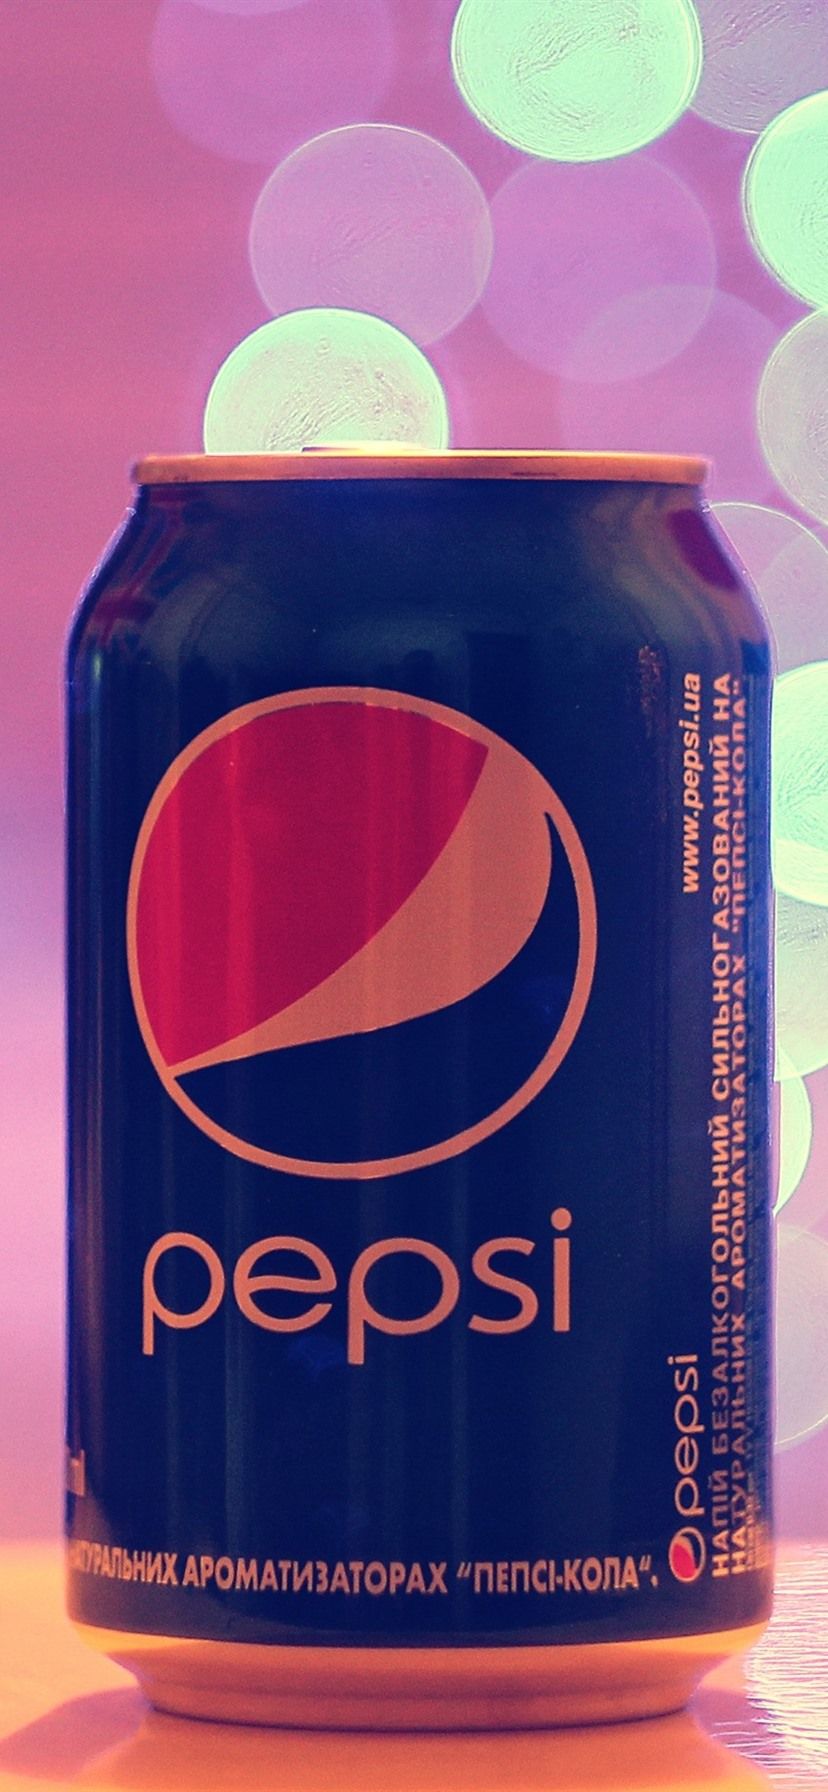 Pepsi Cola, Light Circles 828x1792 IPhone 11 XR Wallpaper, Background, Picture, Image